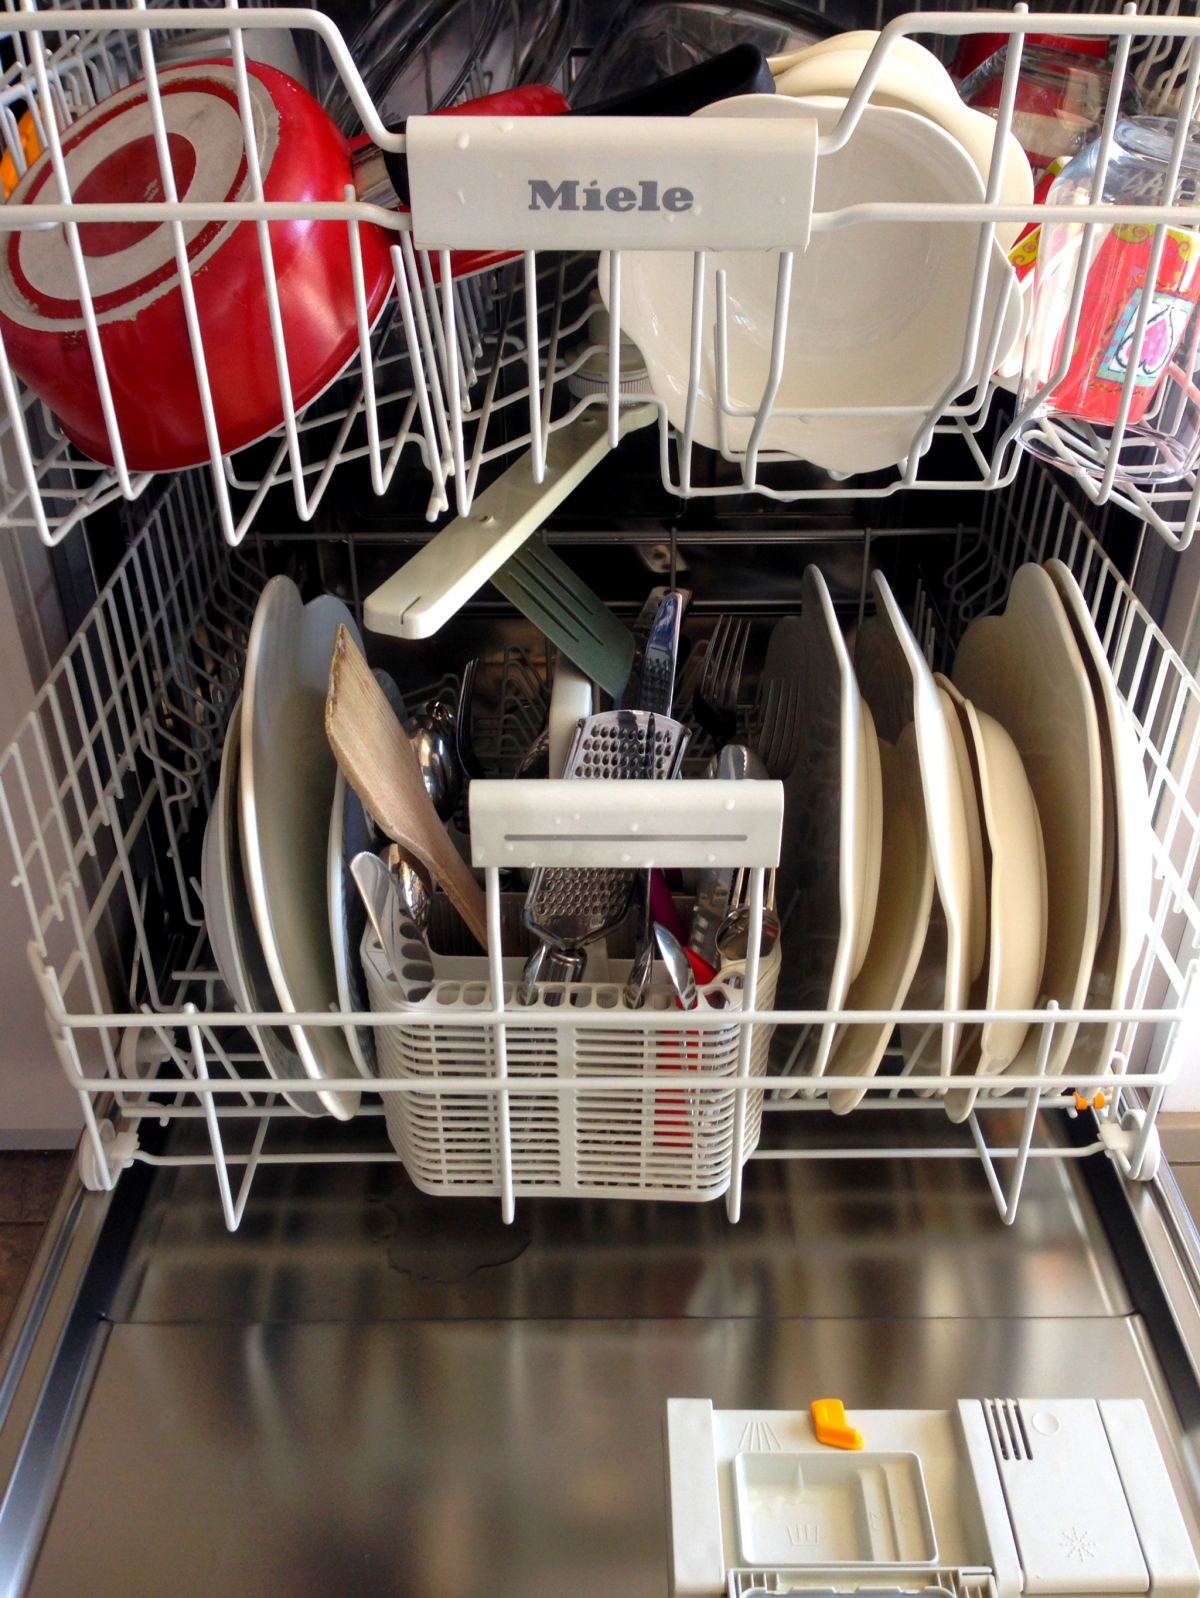 dishes are dirty after dishwasher